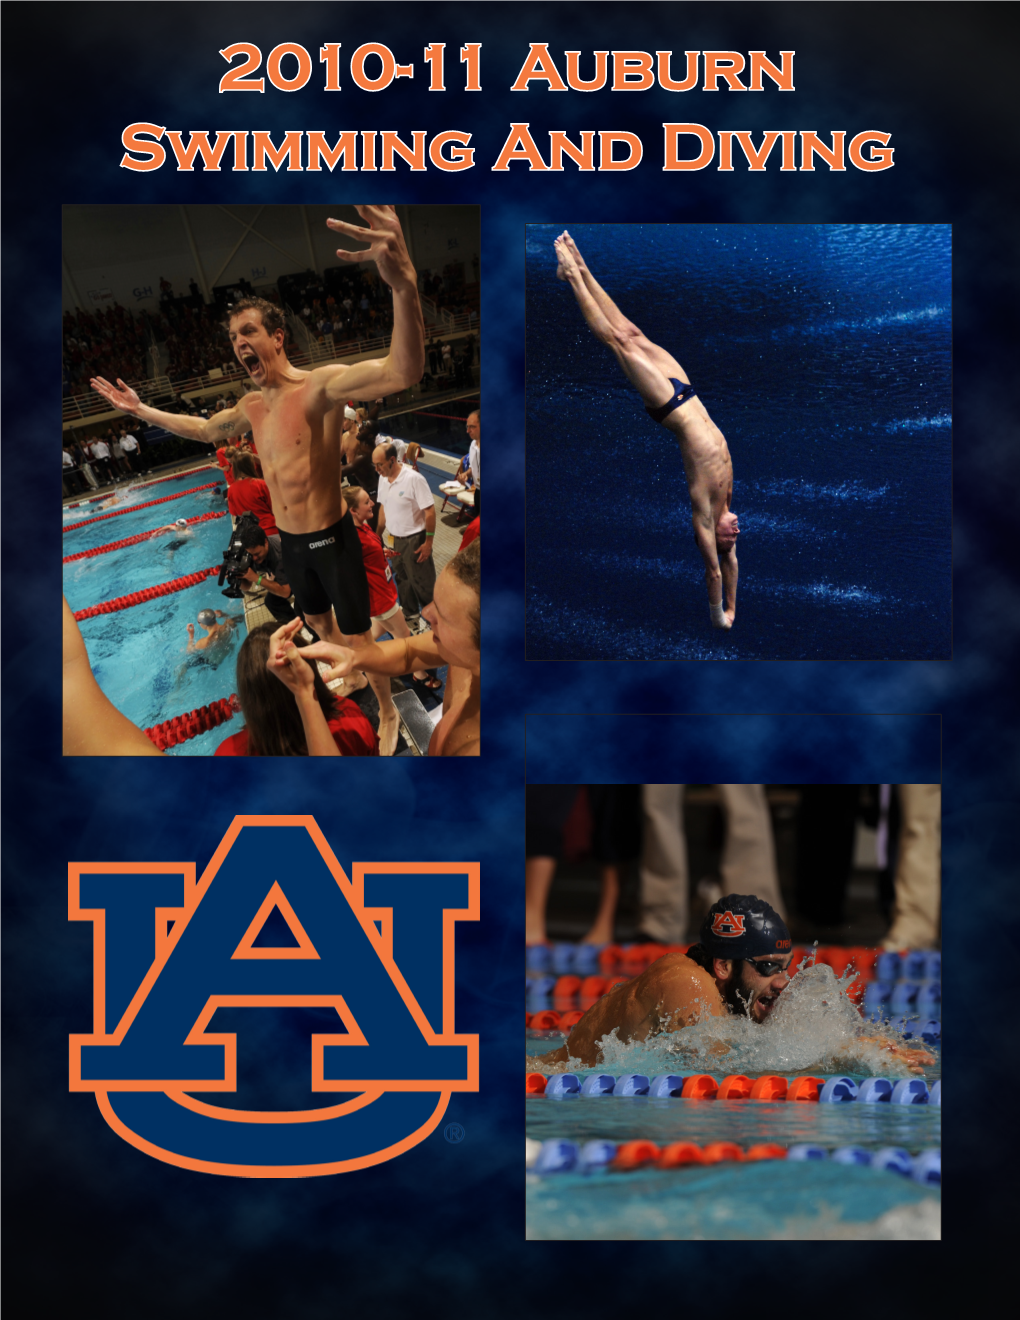 2010-11 Auburn Swimming and Diving